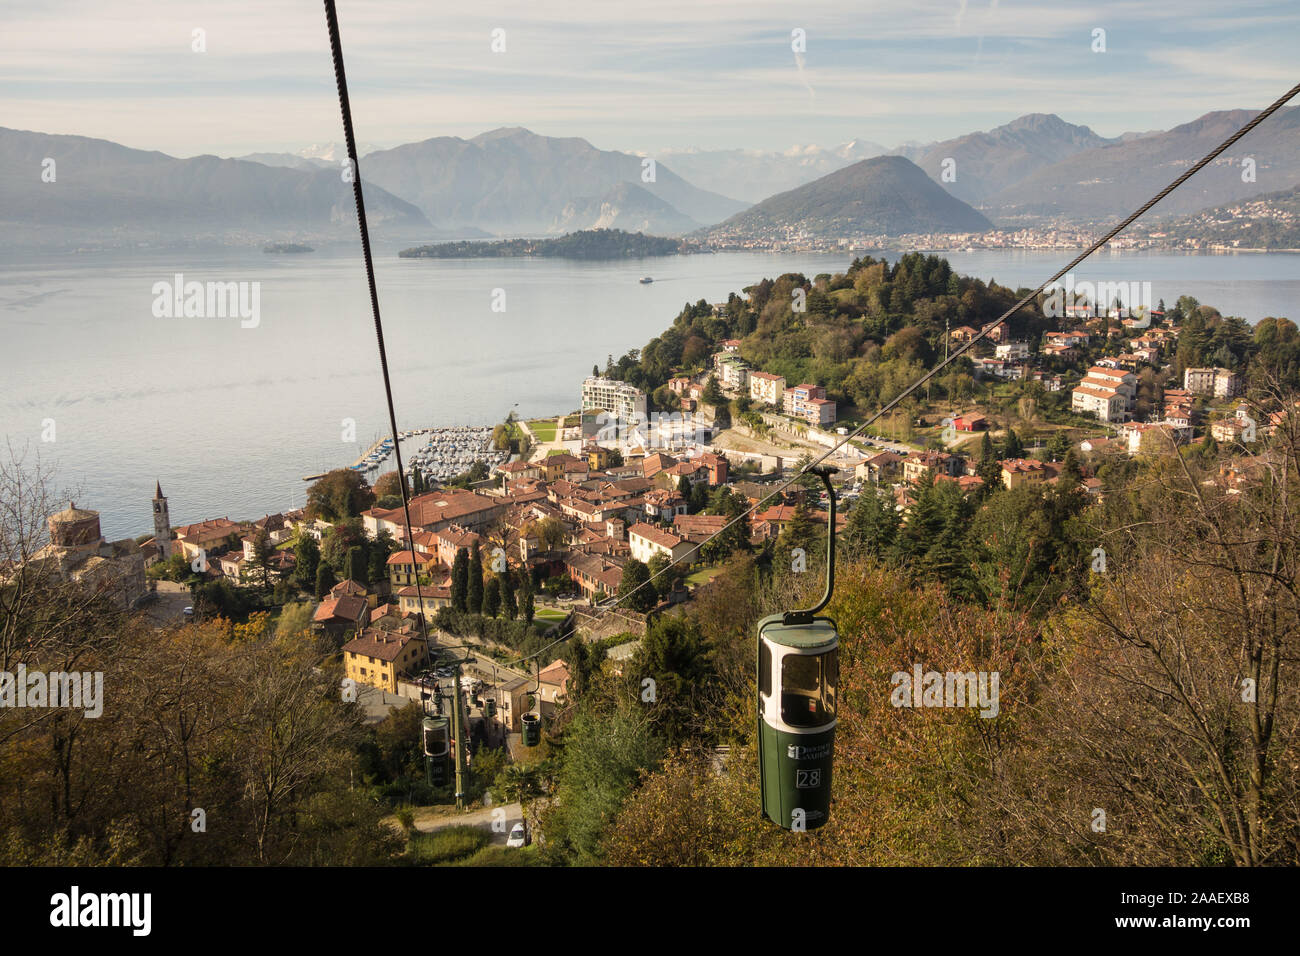 The view on the funicular ride between the town of Laveno-Mombello to the top of Sasso del Ferro mountain, Italy. Lake Maggiore can be seen below. Stock Photo